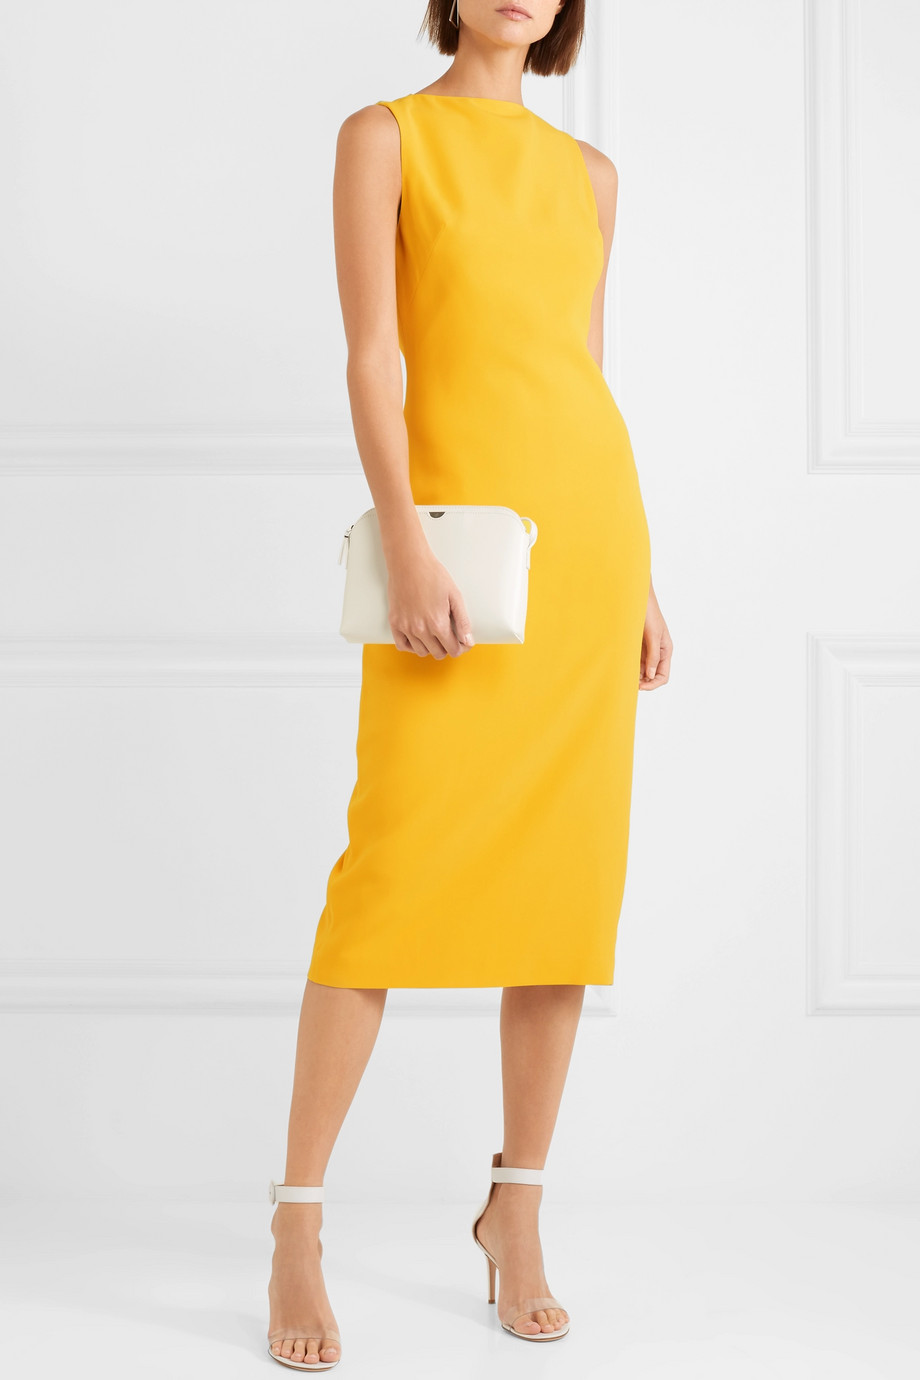 15 Chic Sheath Dresses for Work | Who ...